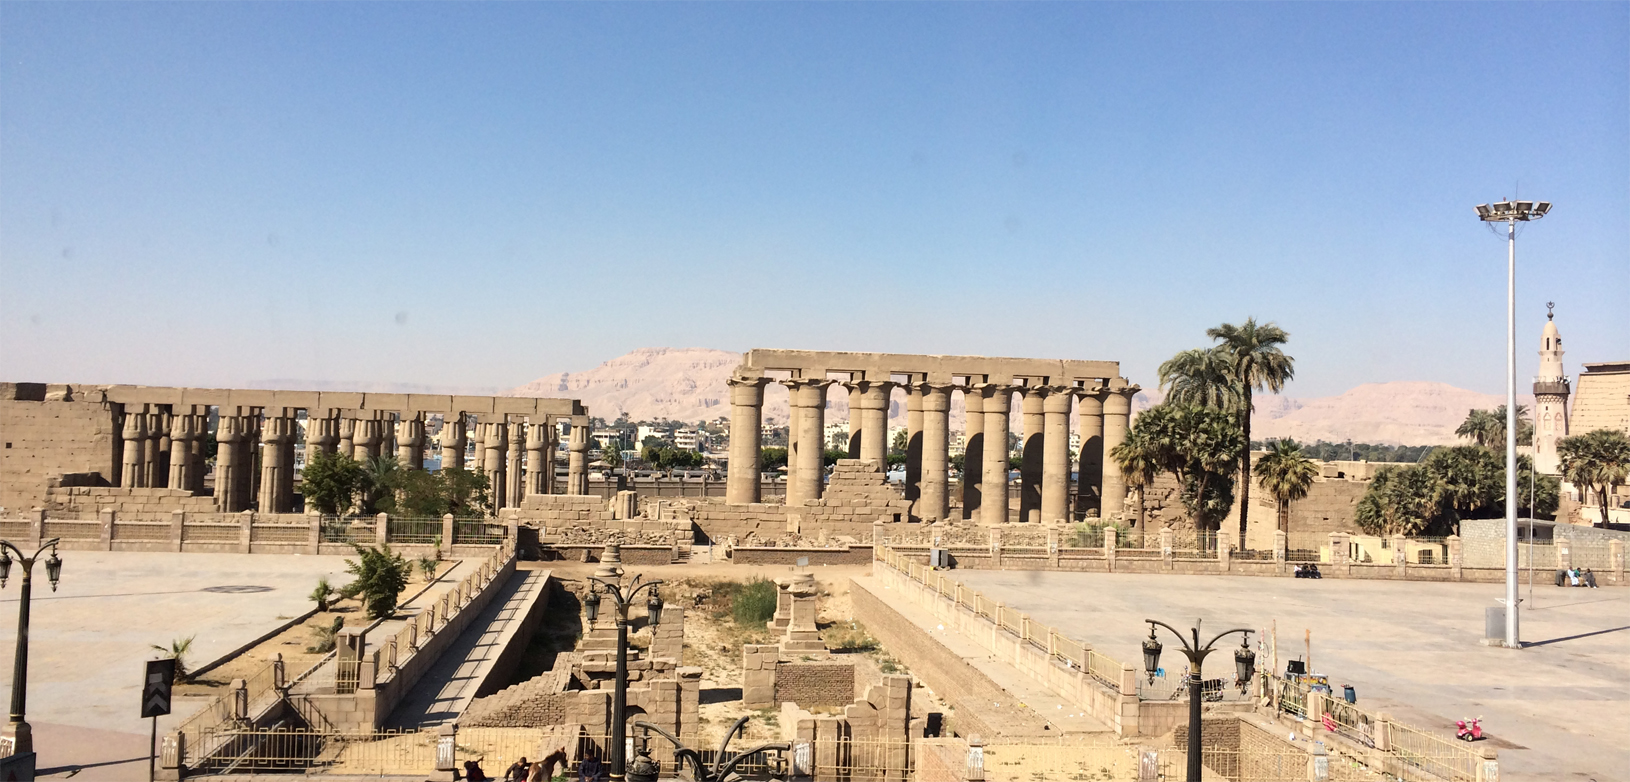 
Luxor temple day tour